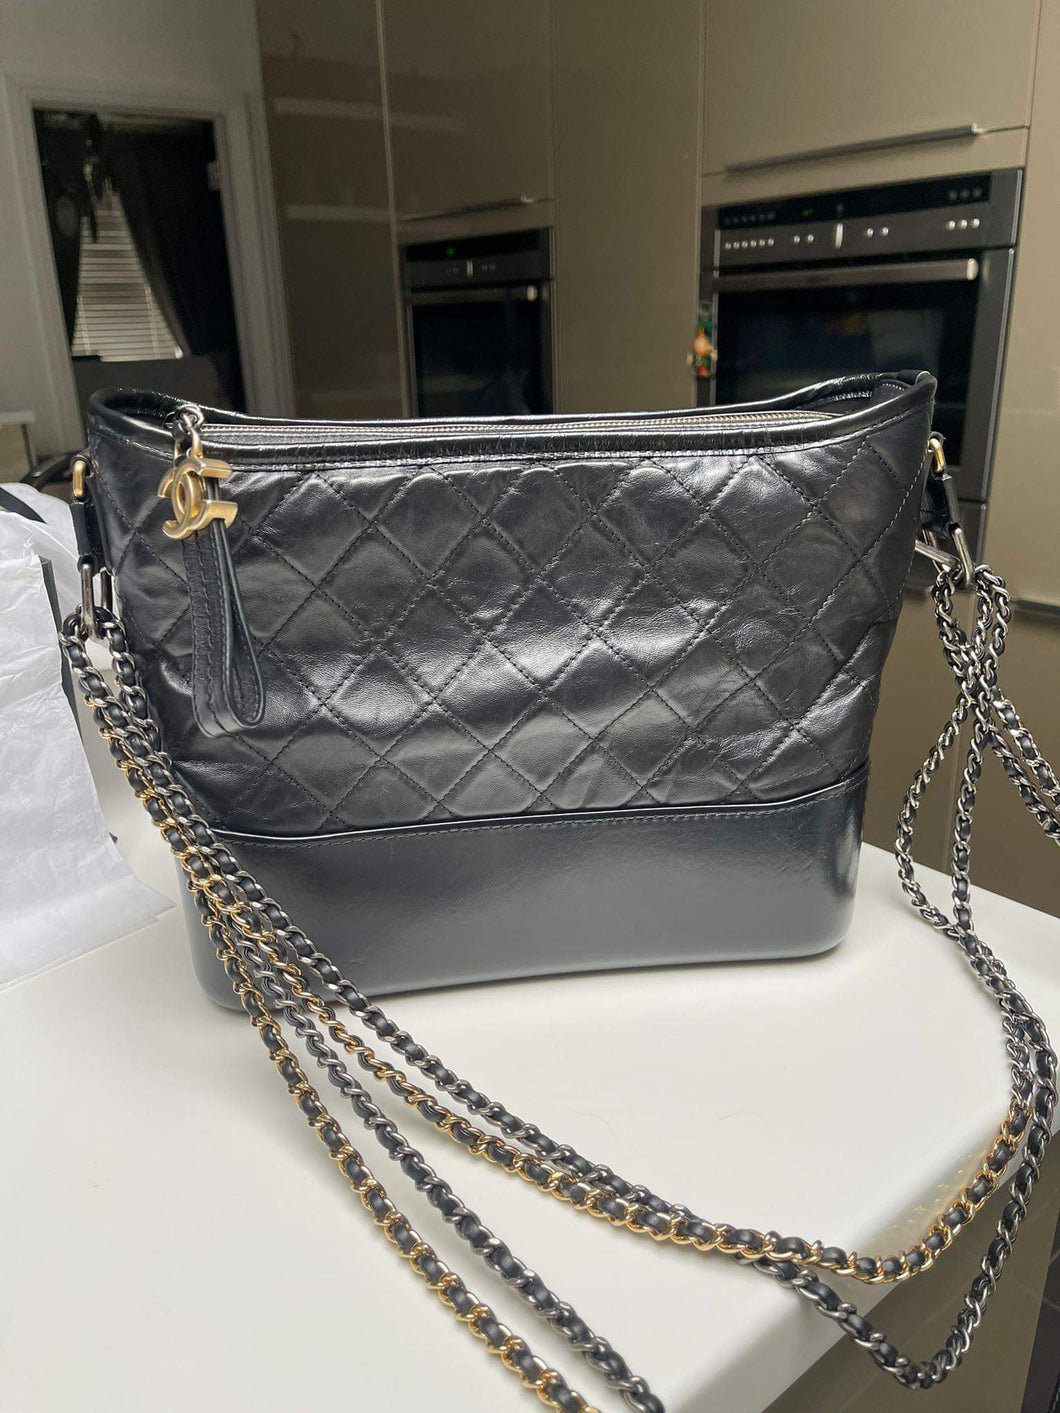 The Chanel Gabrielle Hobo Bag - Size Small